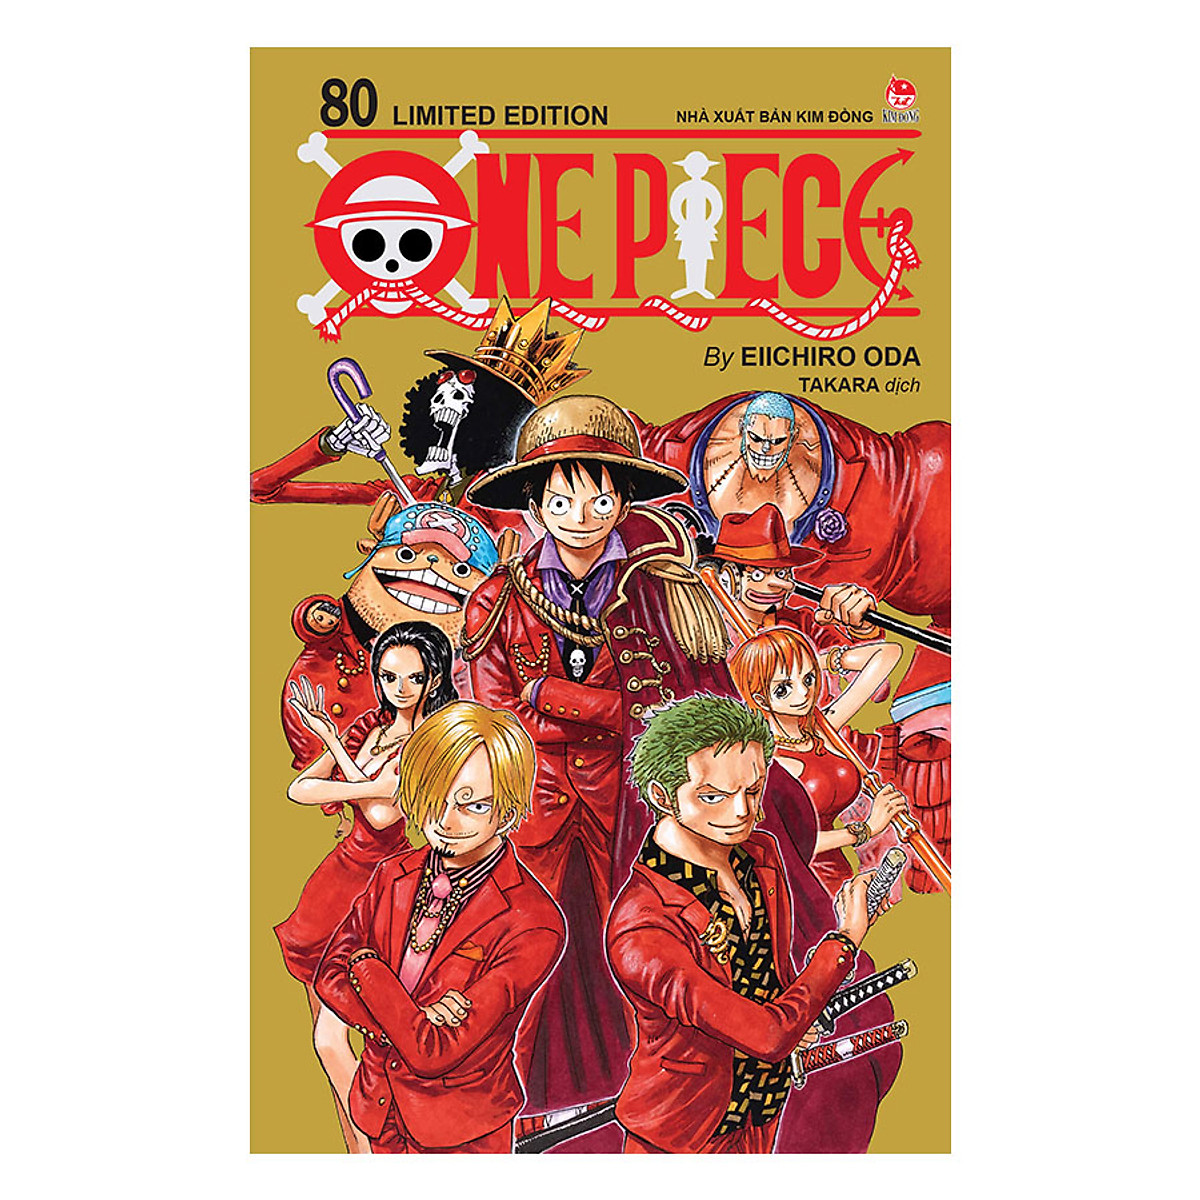 Mua One Piece (Tập 80) - Limited Edition